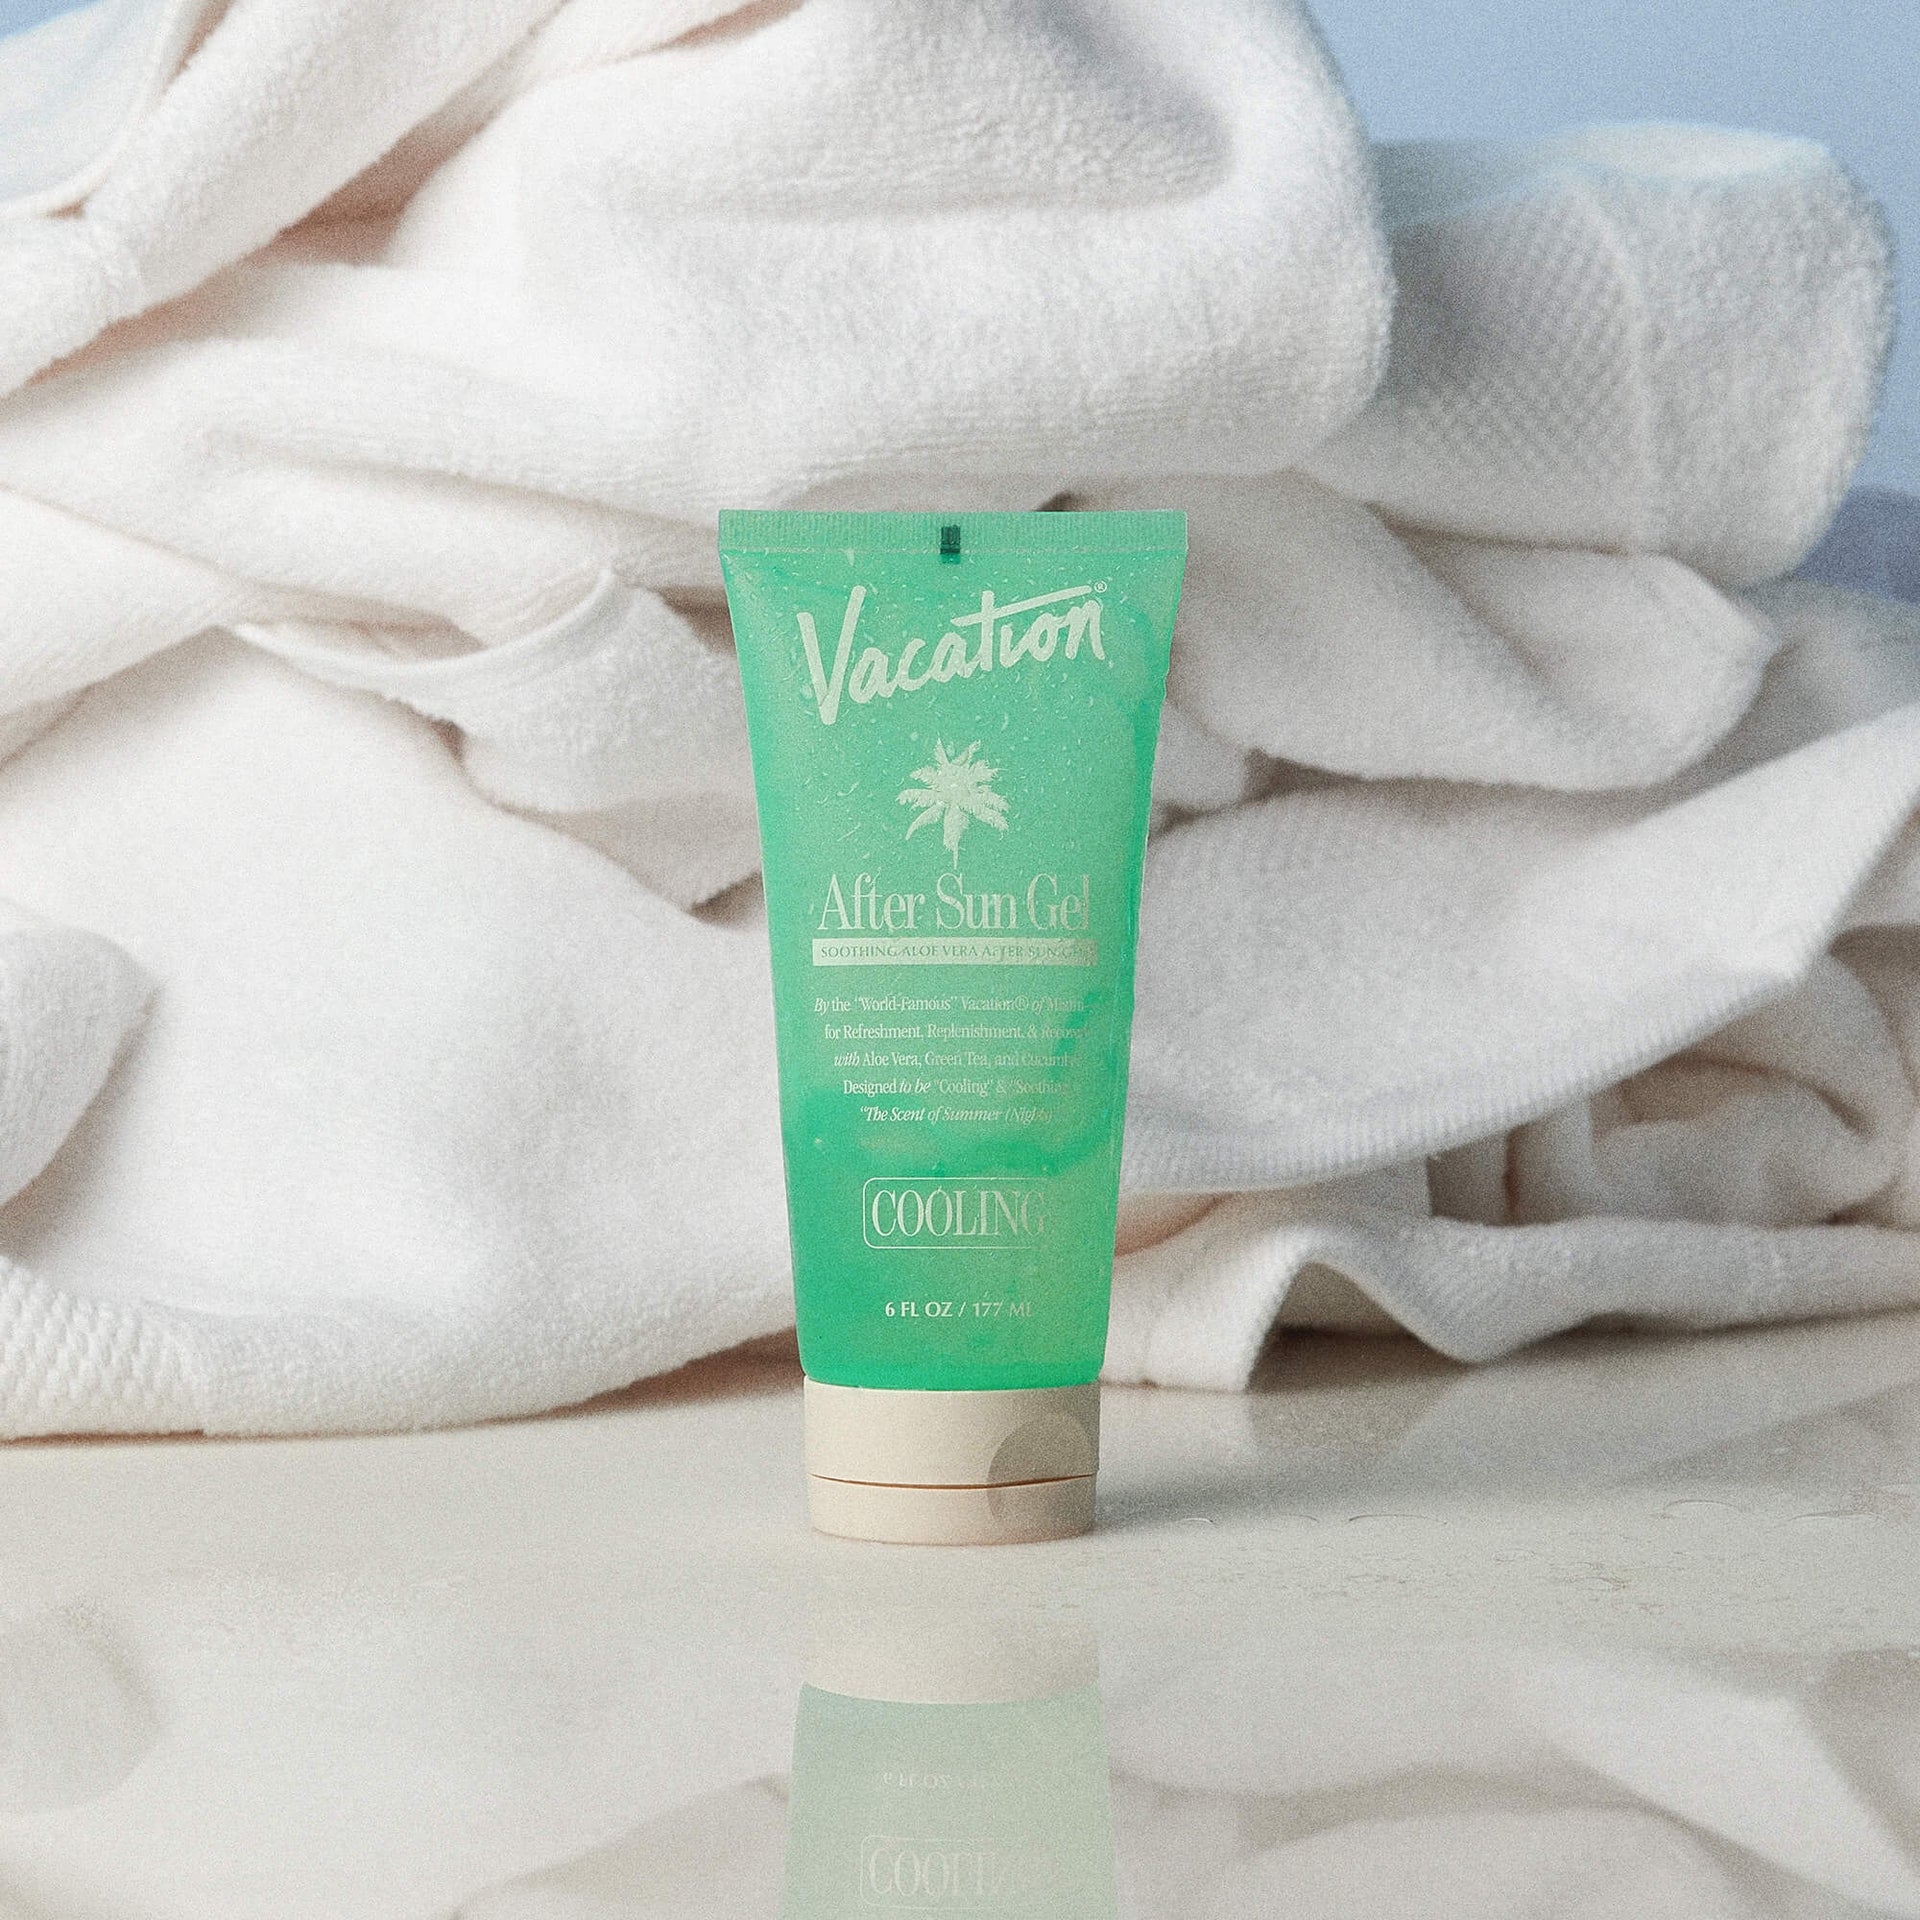 Vacation After Sun Gel created with ARQUISTE Parfumeur